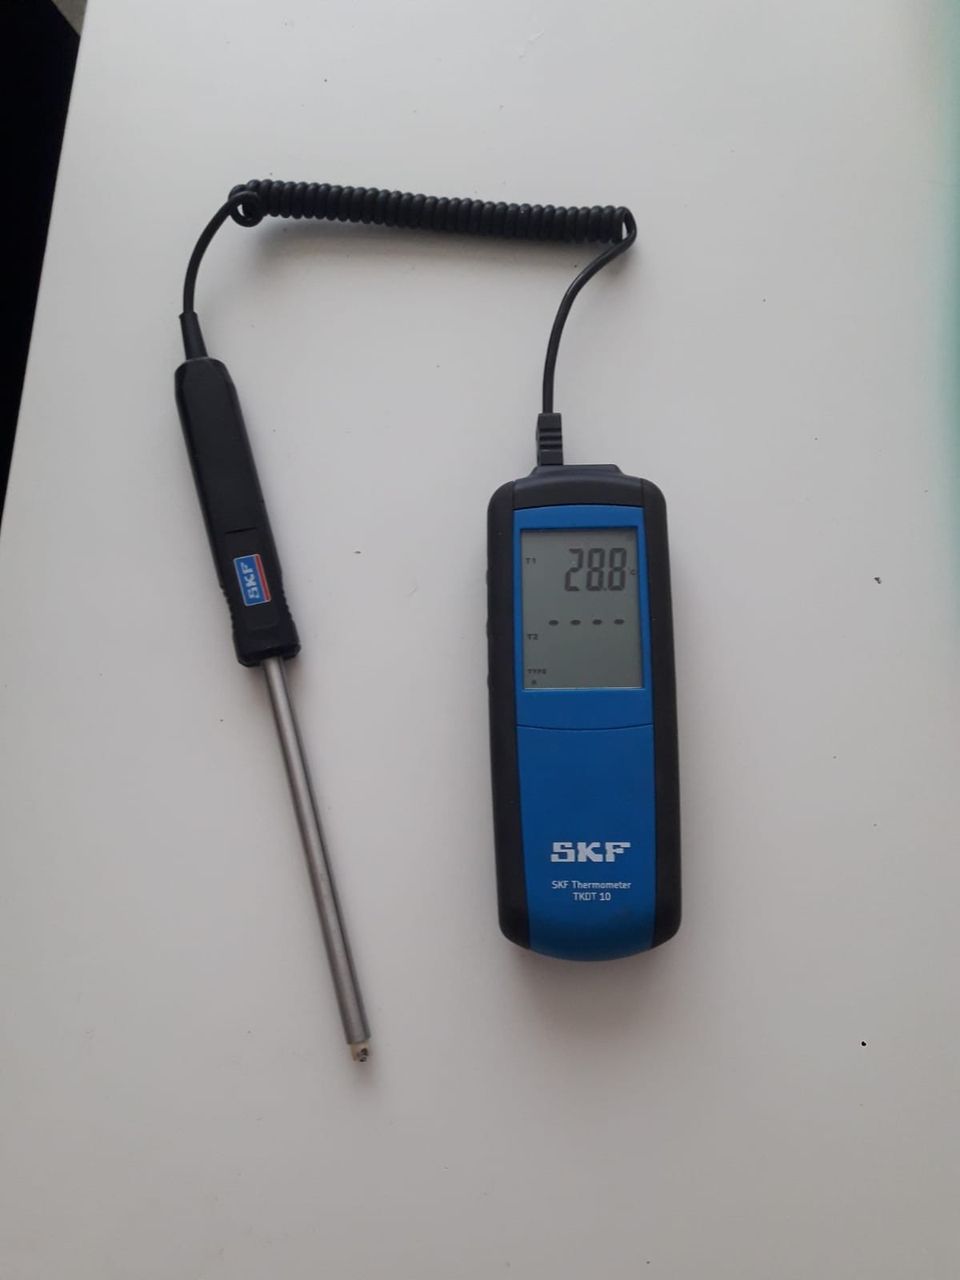 SKF thermometer